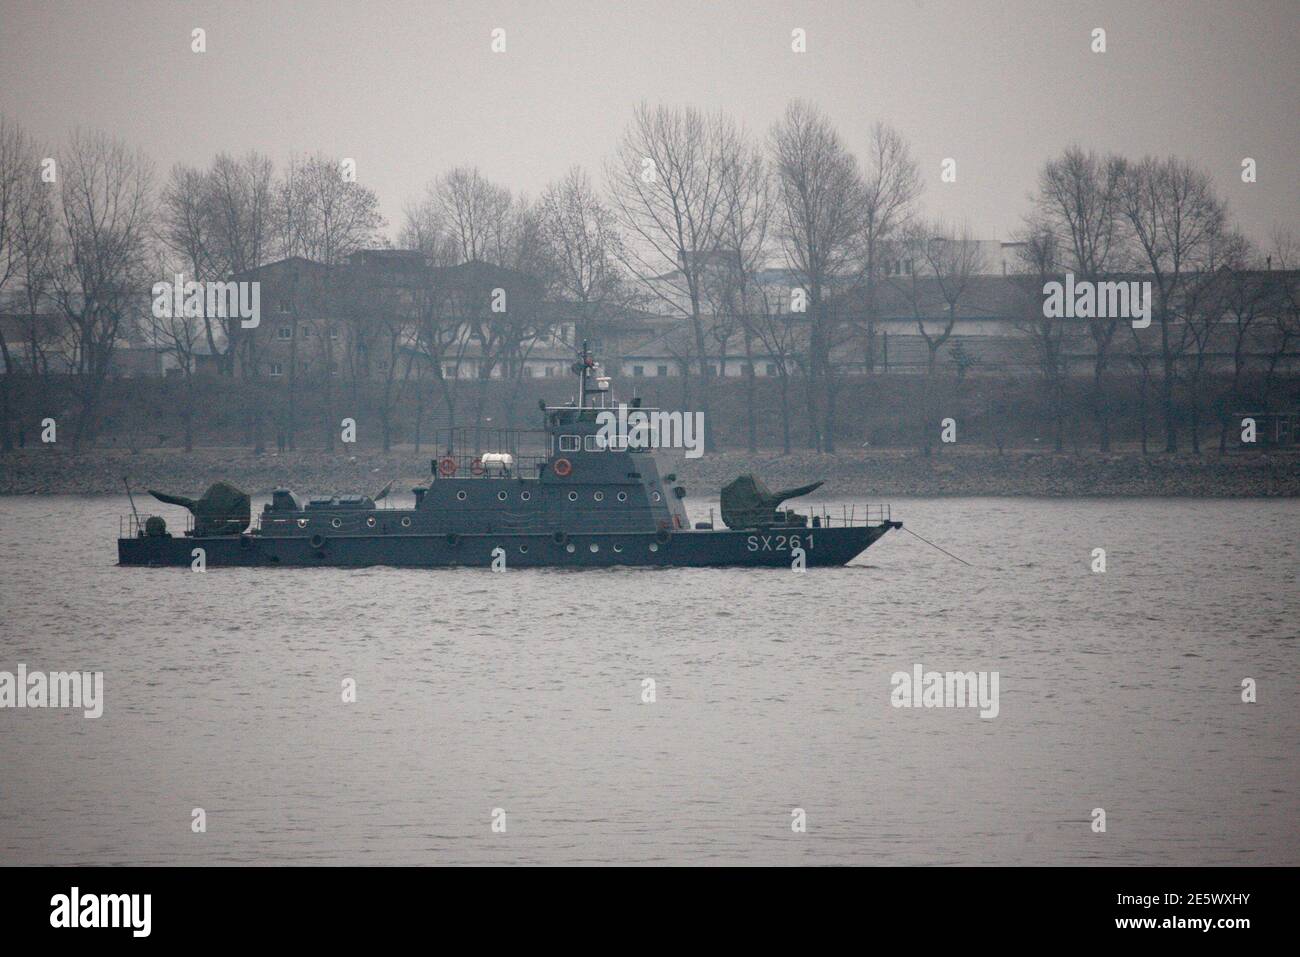 A Chinese military vessel is seen on Yalu River near the North Korean town of Sinuiju, opposite the Chinese border city of Dandong, December 28, 2011. North Korea will hold a funeral procession on Wednesday for its deceased 'dear leader', Kim Jong-il, making way for his son, Kim Jong-un, to become the third member of the family to run the isolated and unpredictable Asian country.   REUTERS/Jacky Chen (NORTH KOREA - Tags: POLITICS OBITUARY) Stock Photo